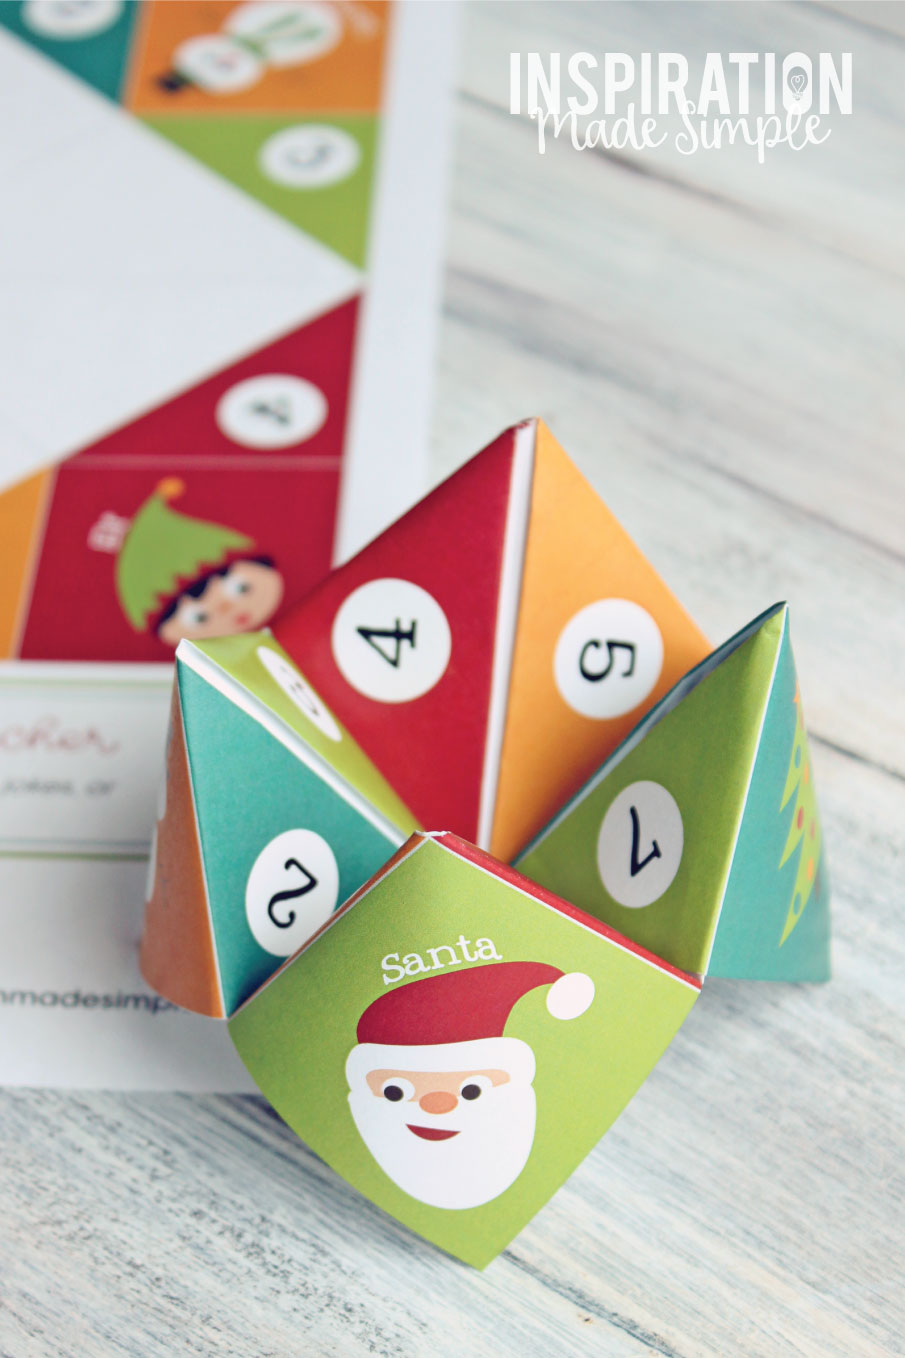 Printable Christmas Themed Cootie Catcher - one pre-filled, one blank plus bonus Christmas Lunch Jokes! Great Holiday conversation starter!